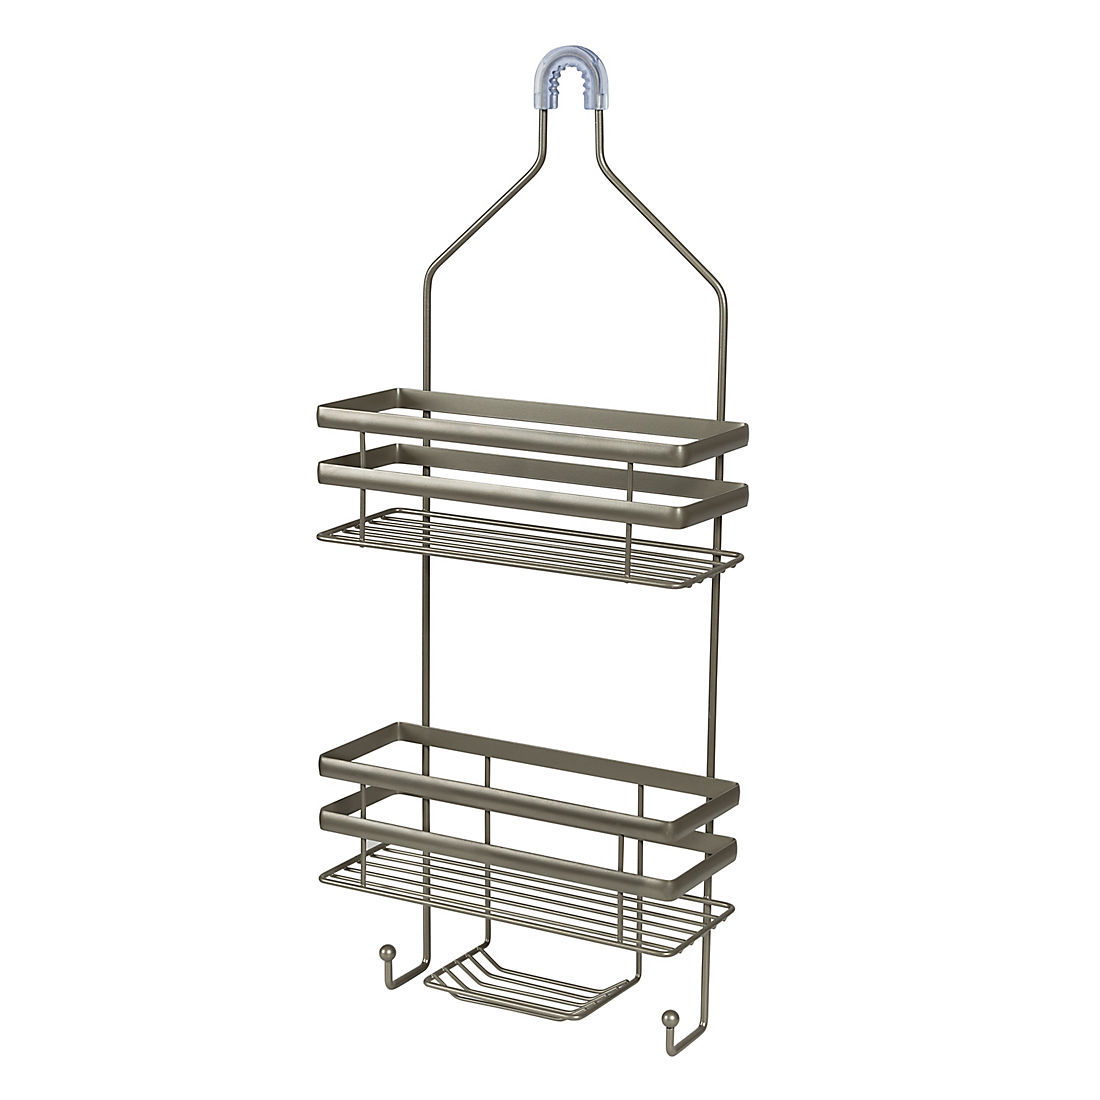 Honey-Can-Do Flat Wire Steel Shower Caddy - Gray